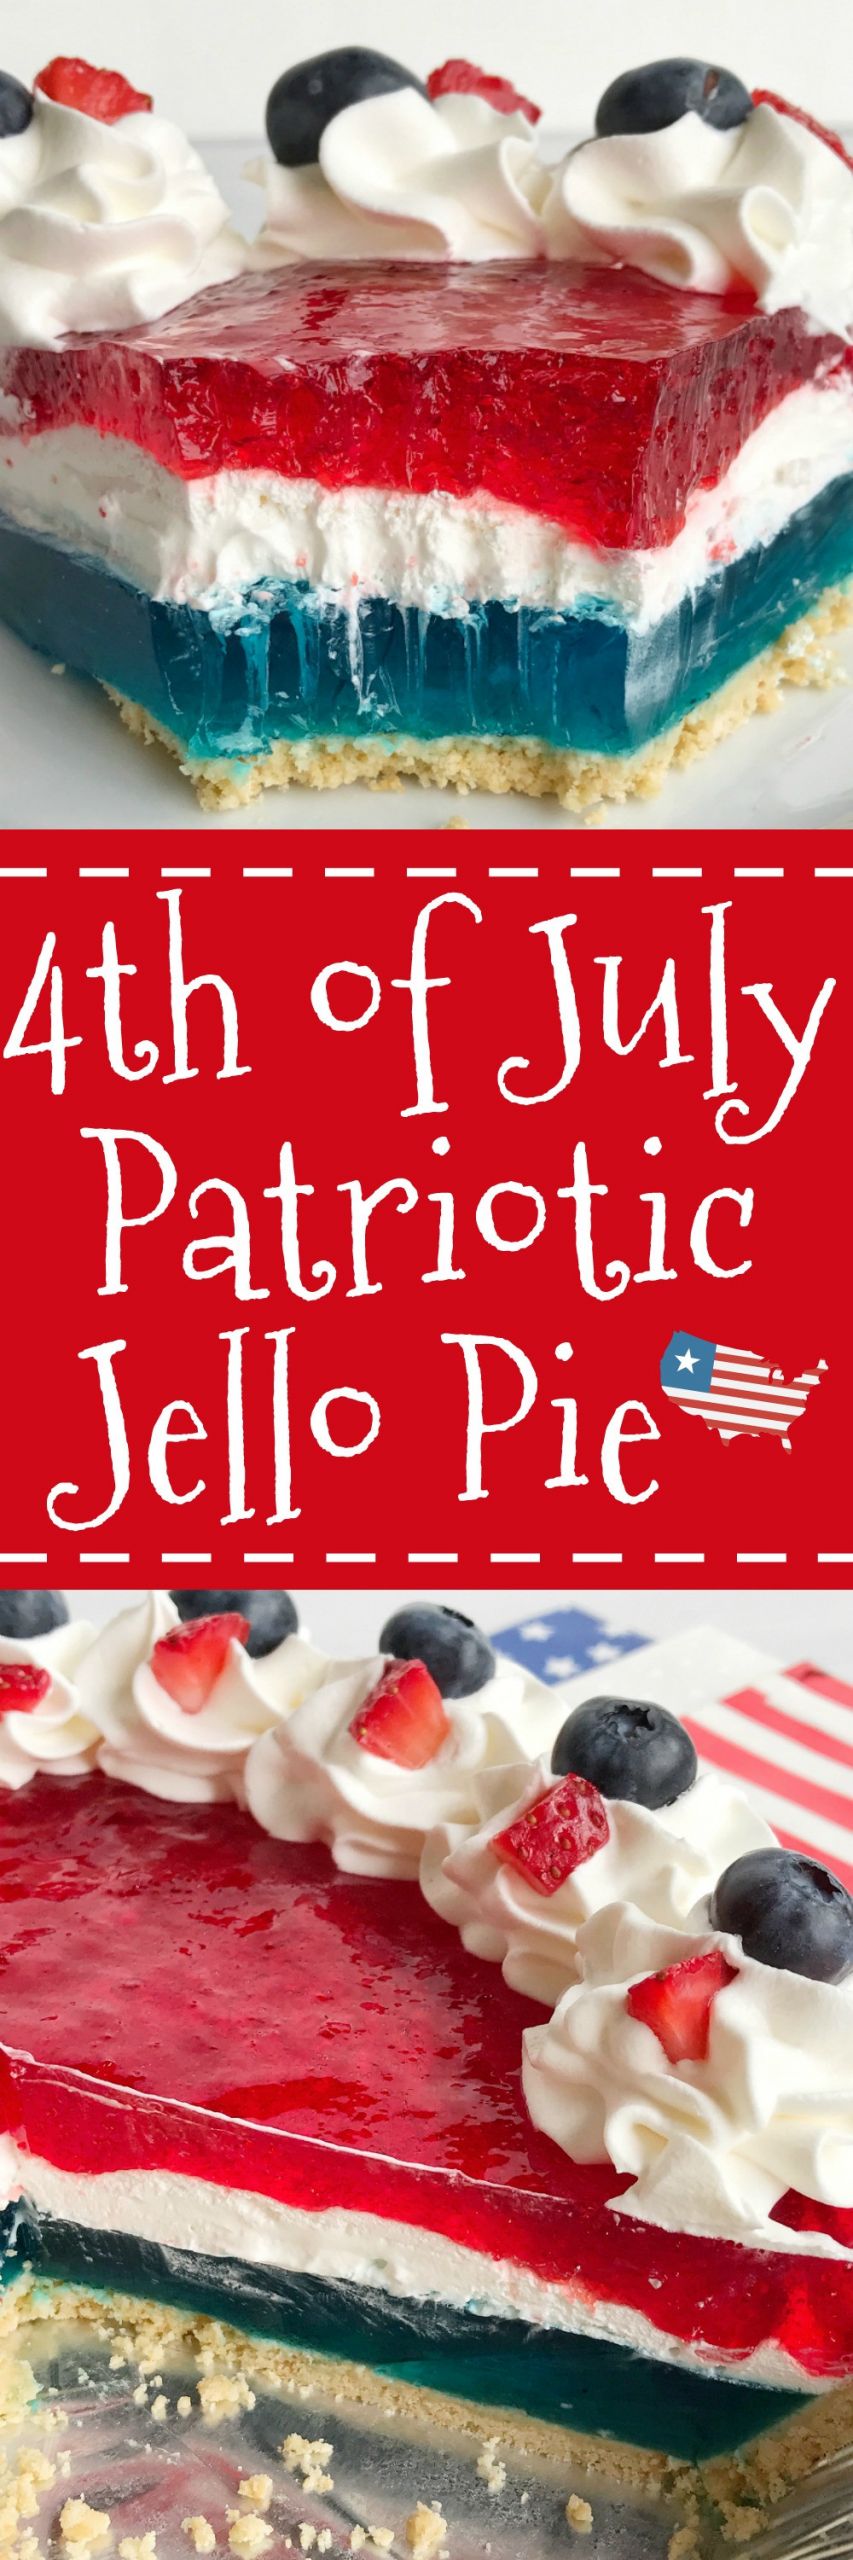 Fourth Of July Pie Recipes
 4th of July Patriotic Jello Pie To her as Family